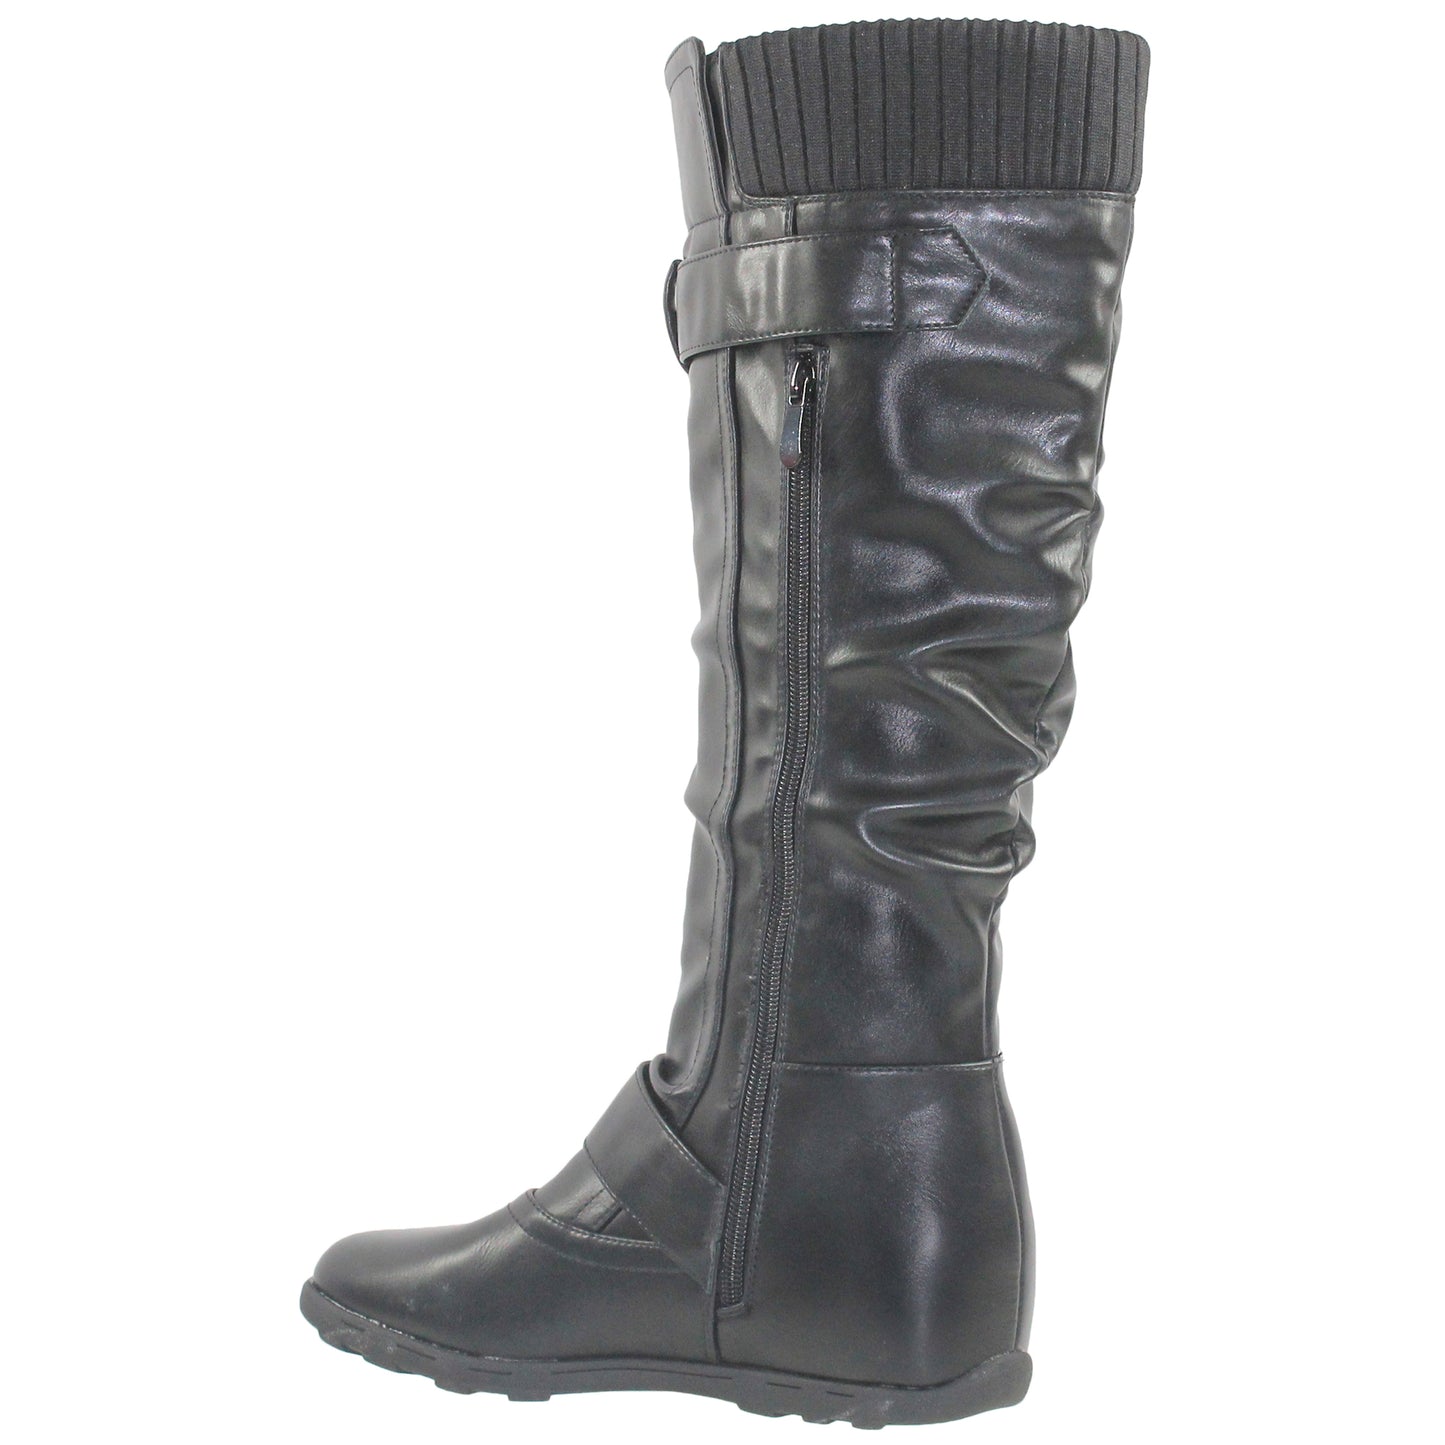 SOBEYO Women's Boots Ruched Knit Cuff Double Straps Buckles Black Leather